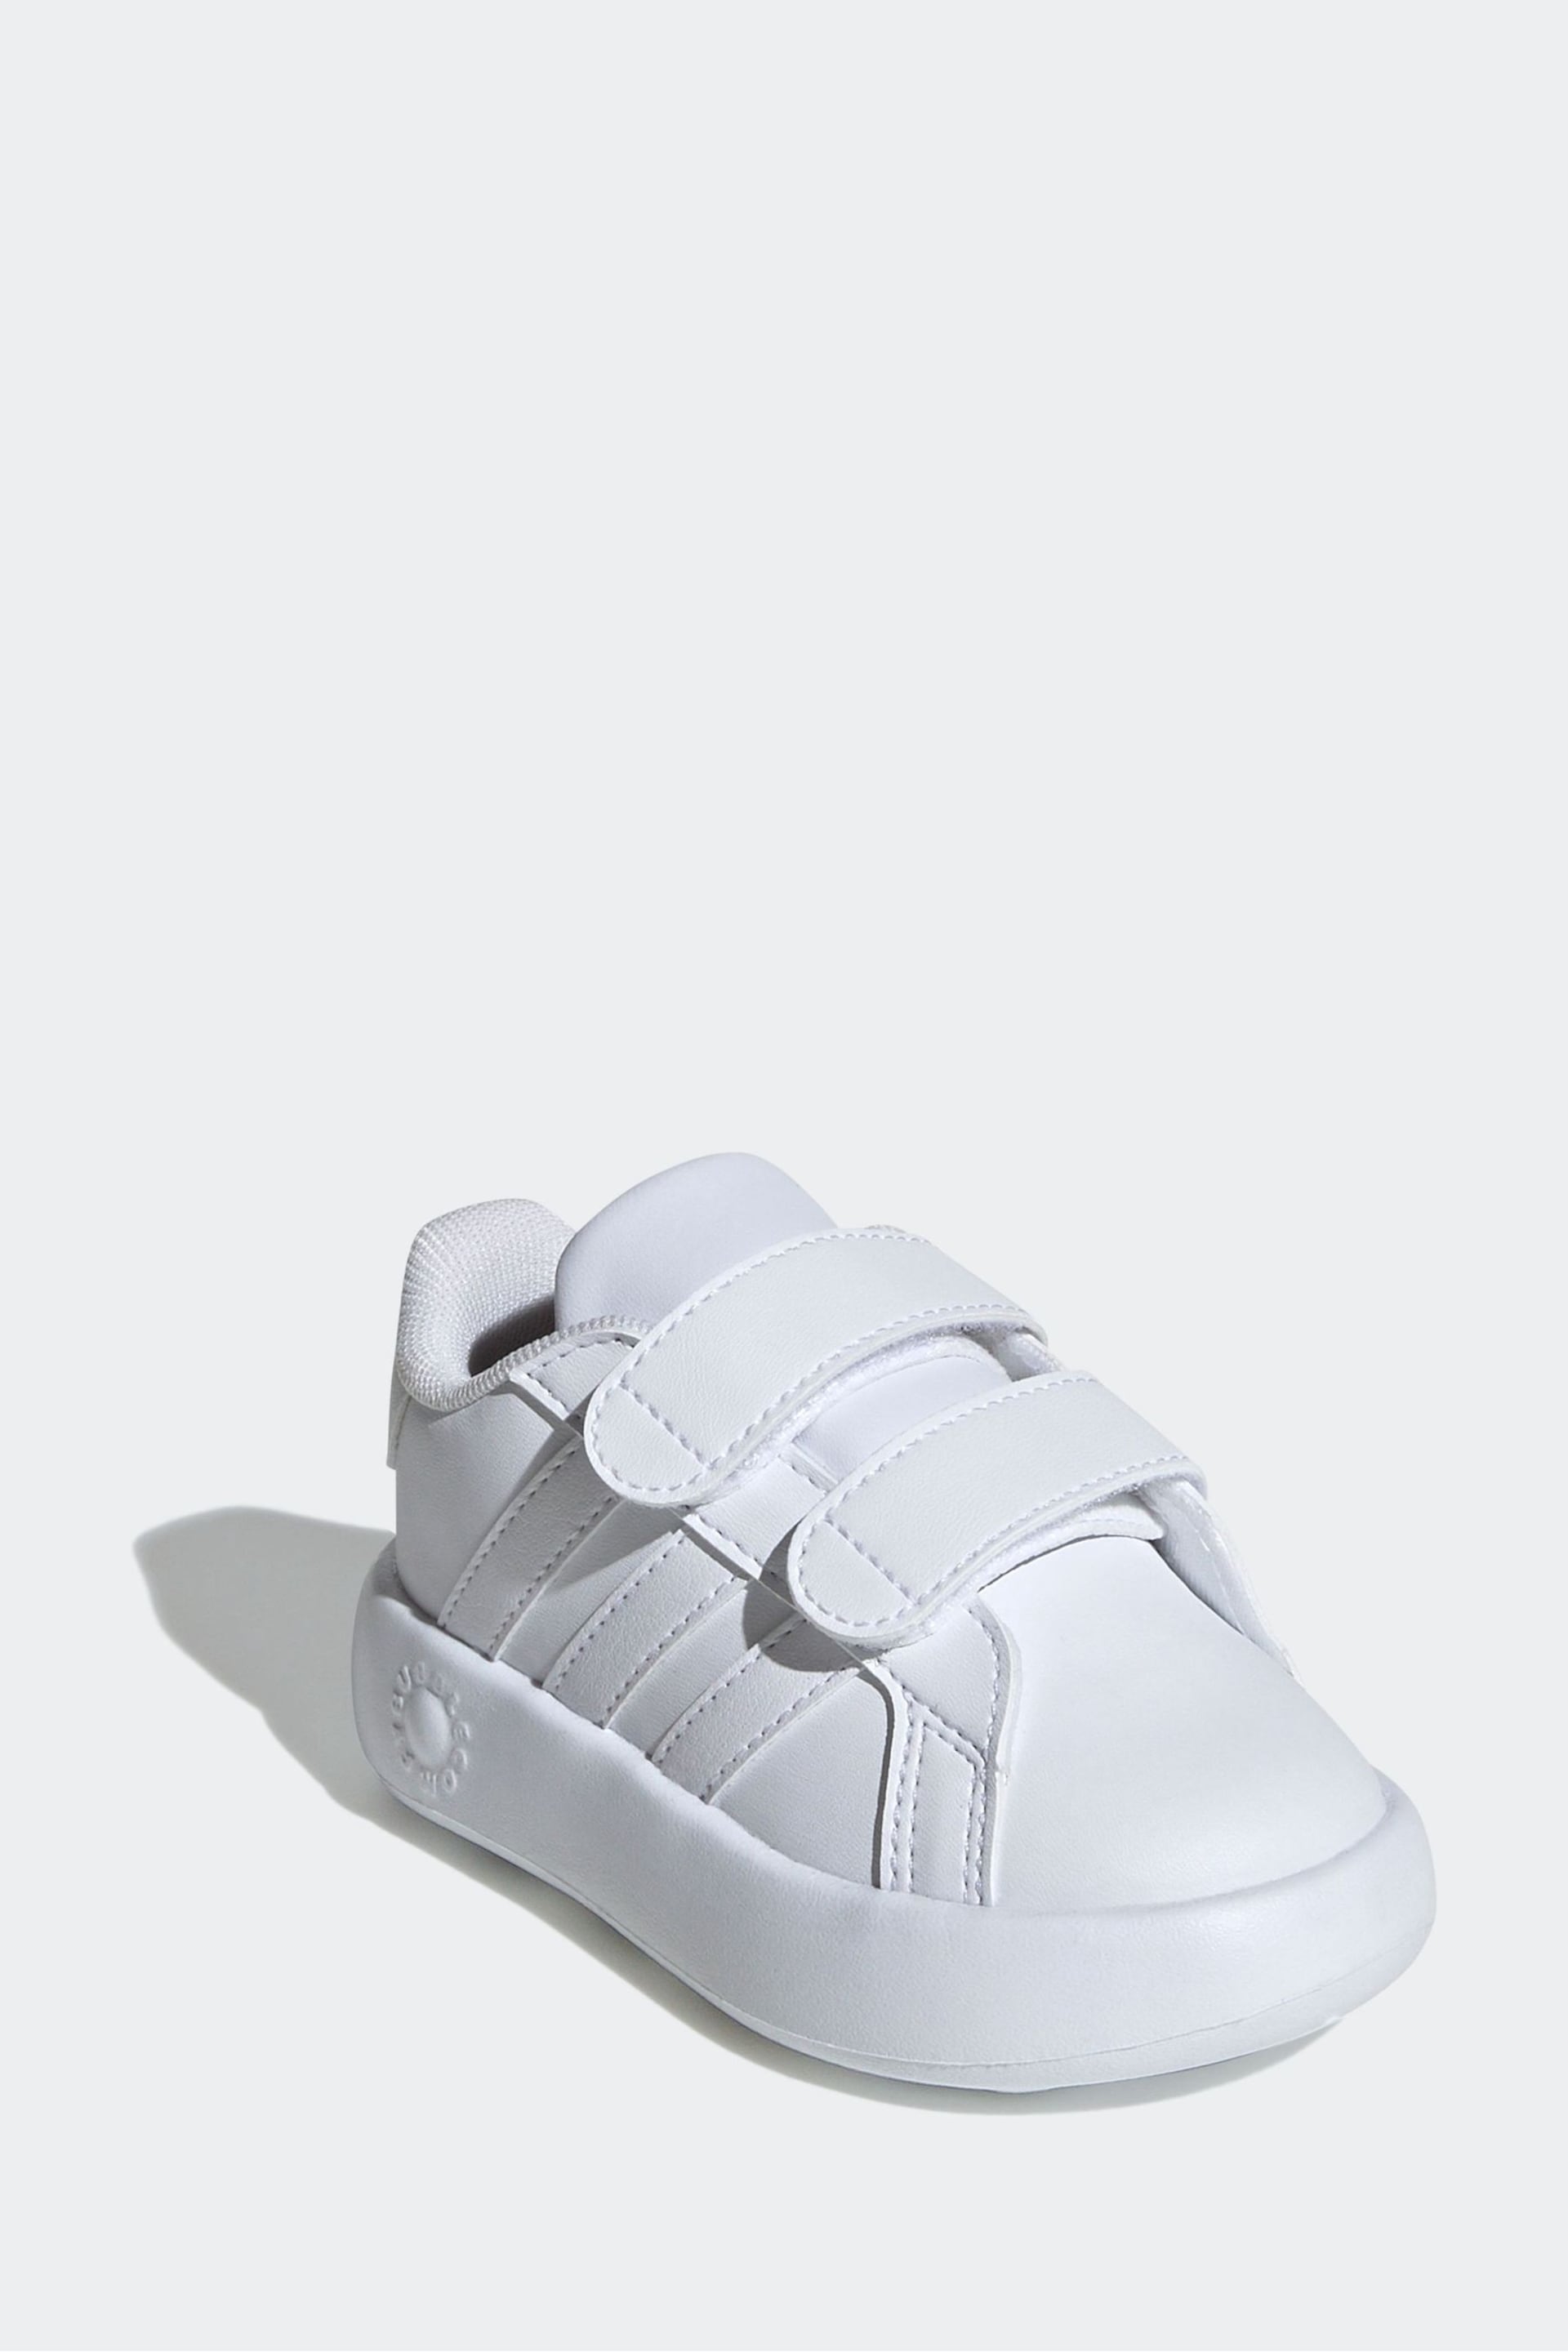 adidas White Kids Grand Court 2.0 Shoes - Image 3 of 8